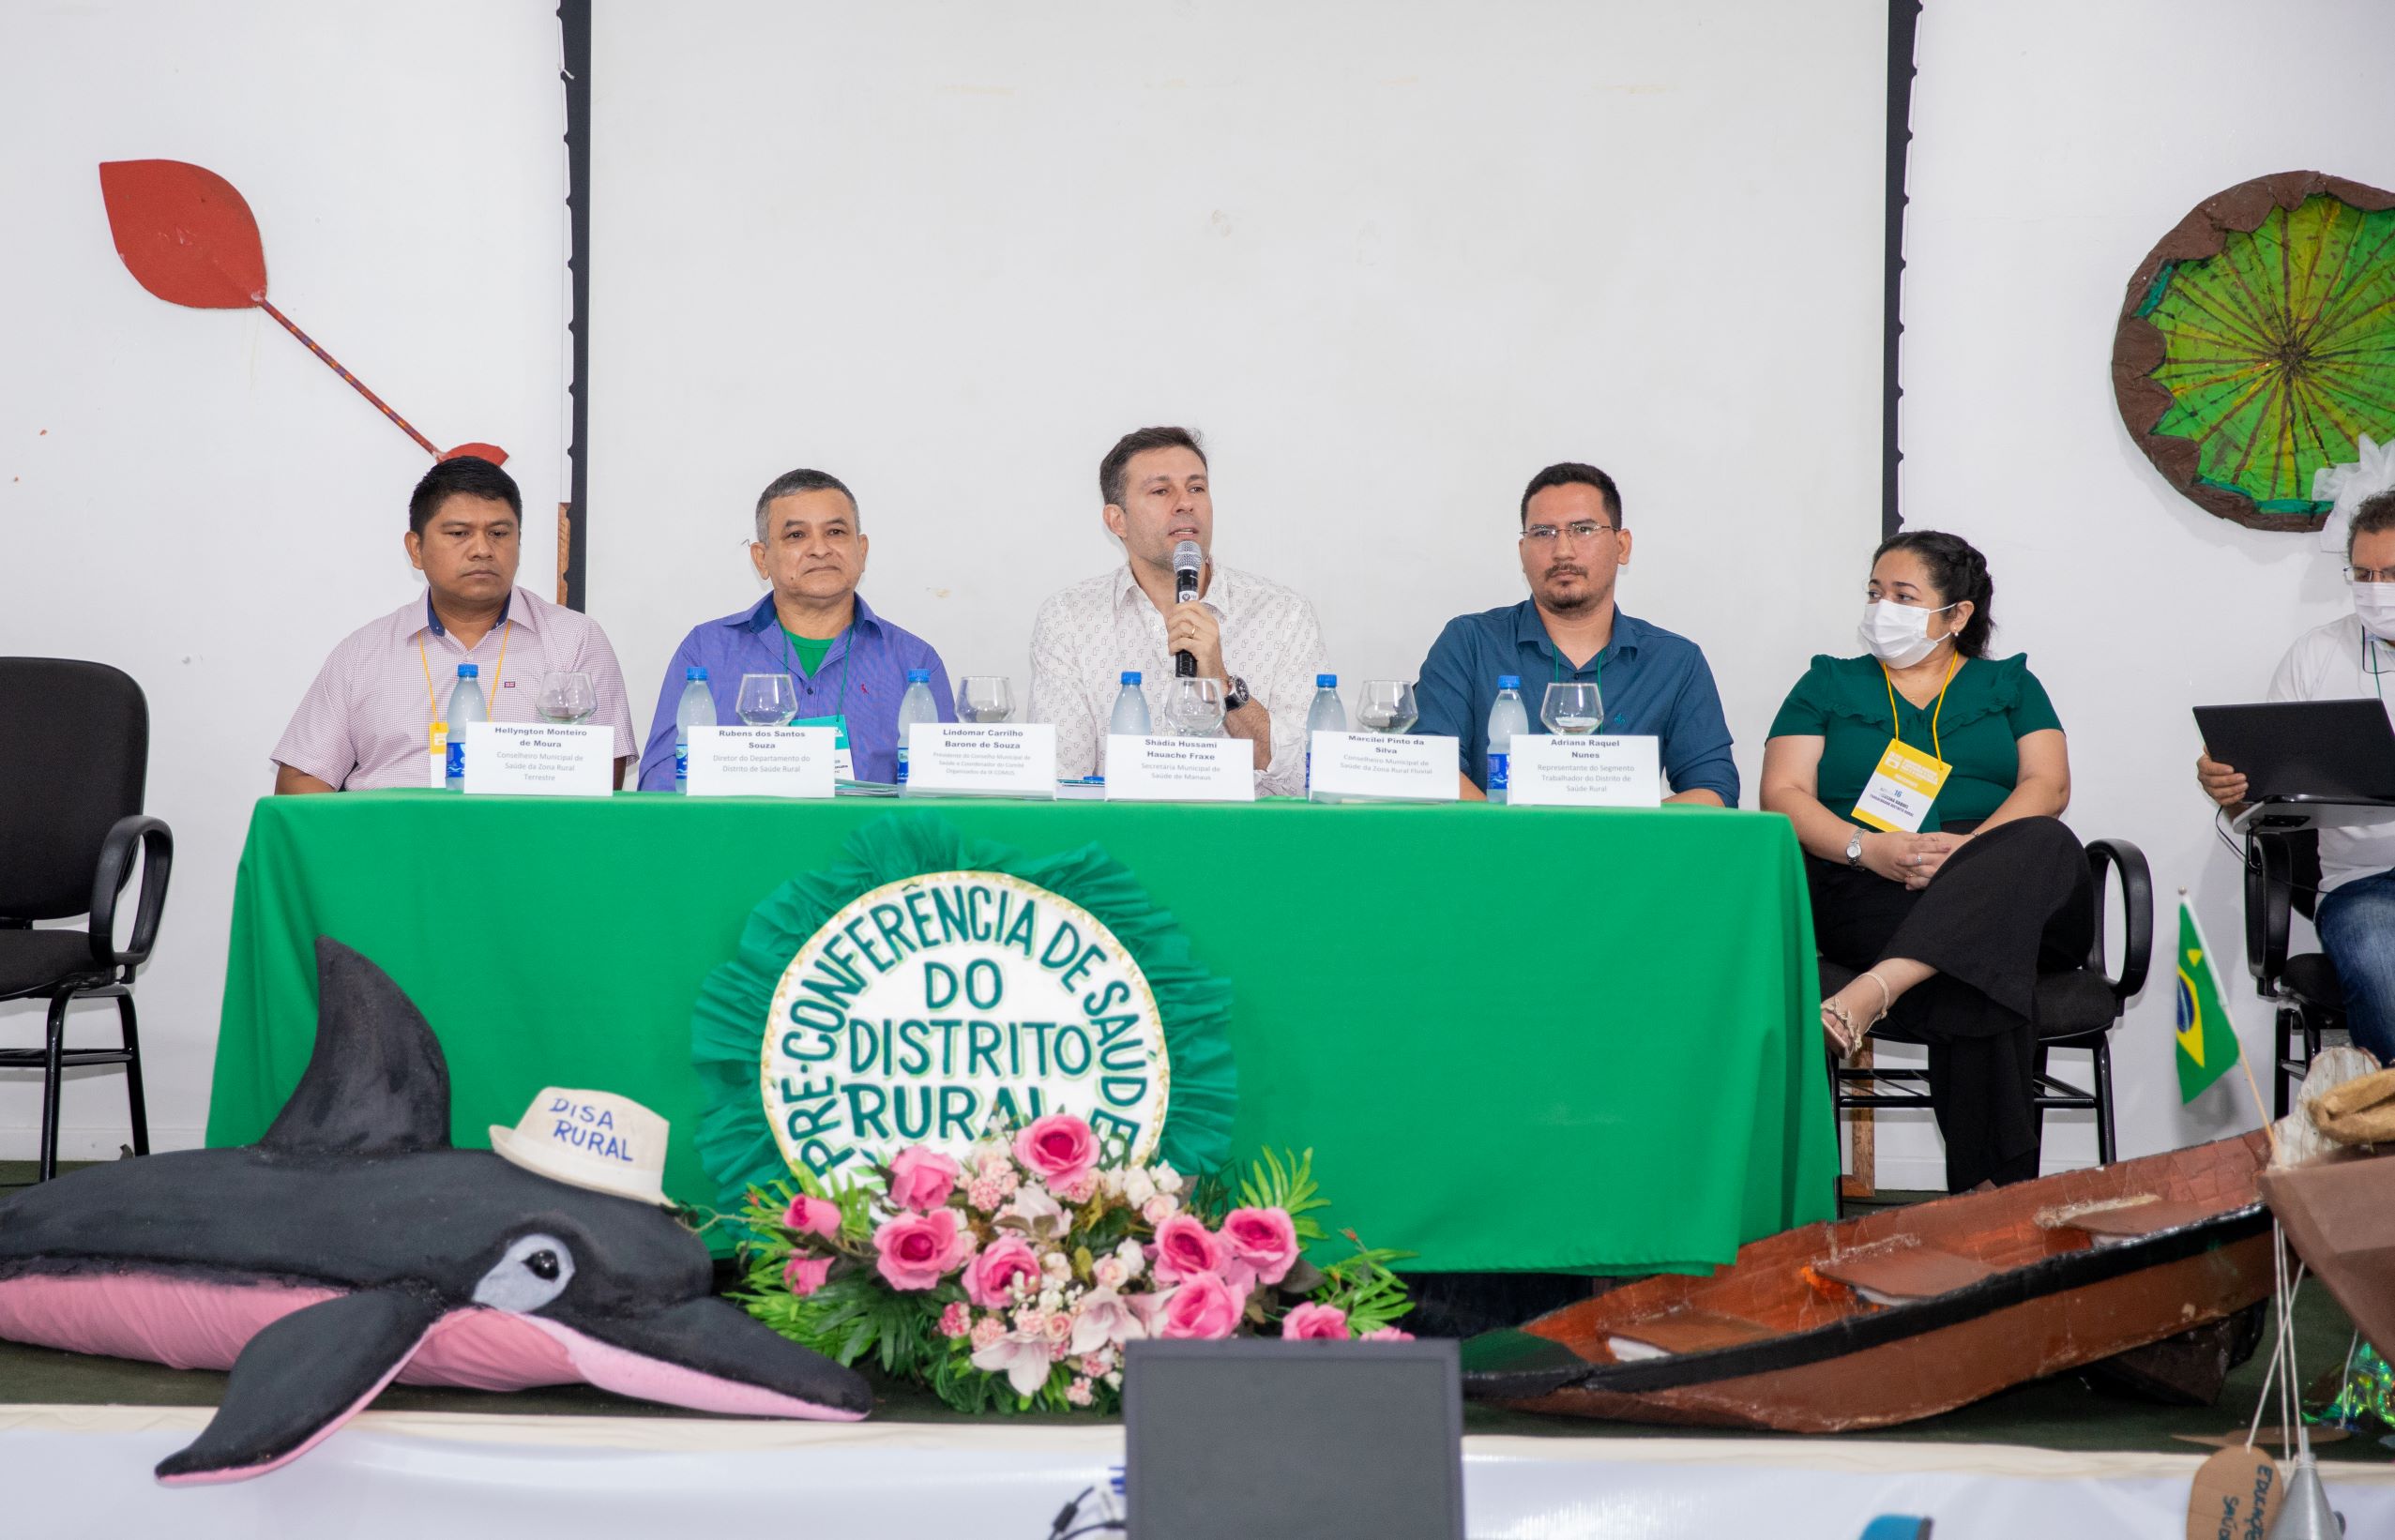 SUS managers, workers and users take part in an introductory conference on rural health